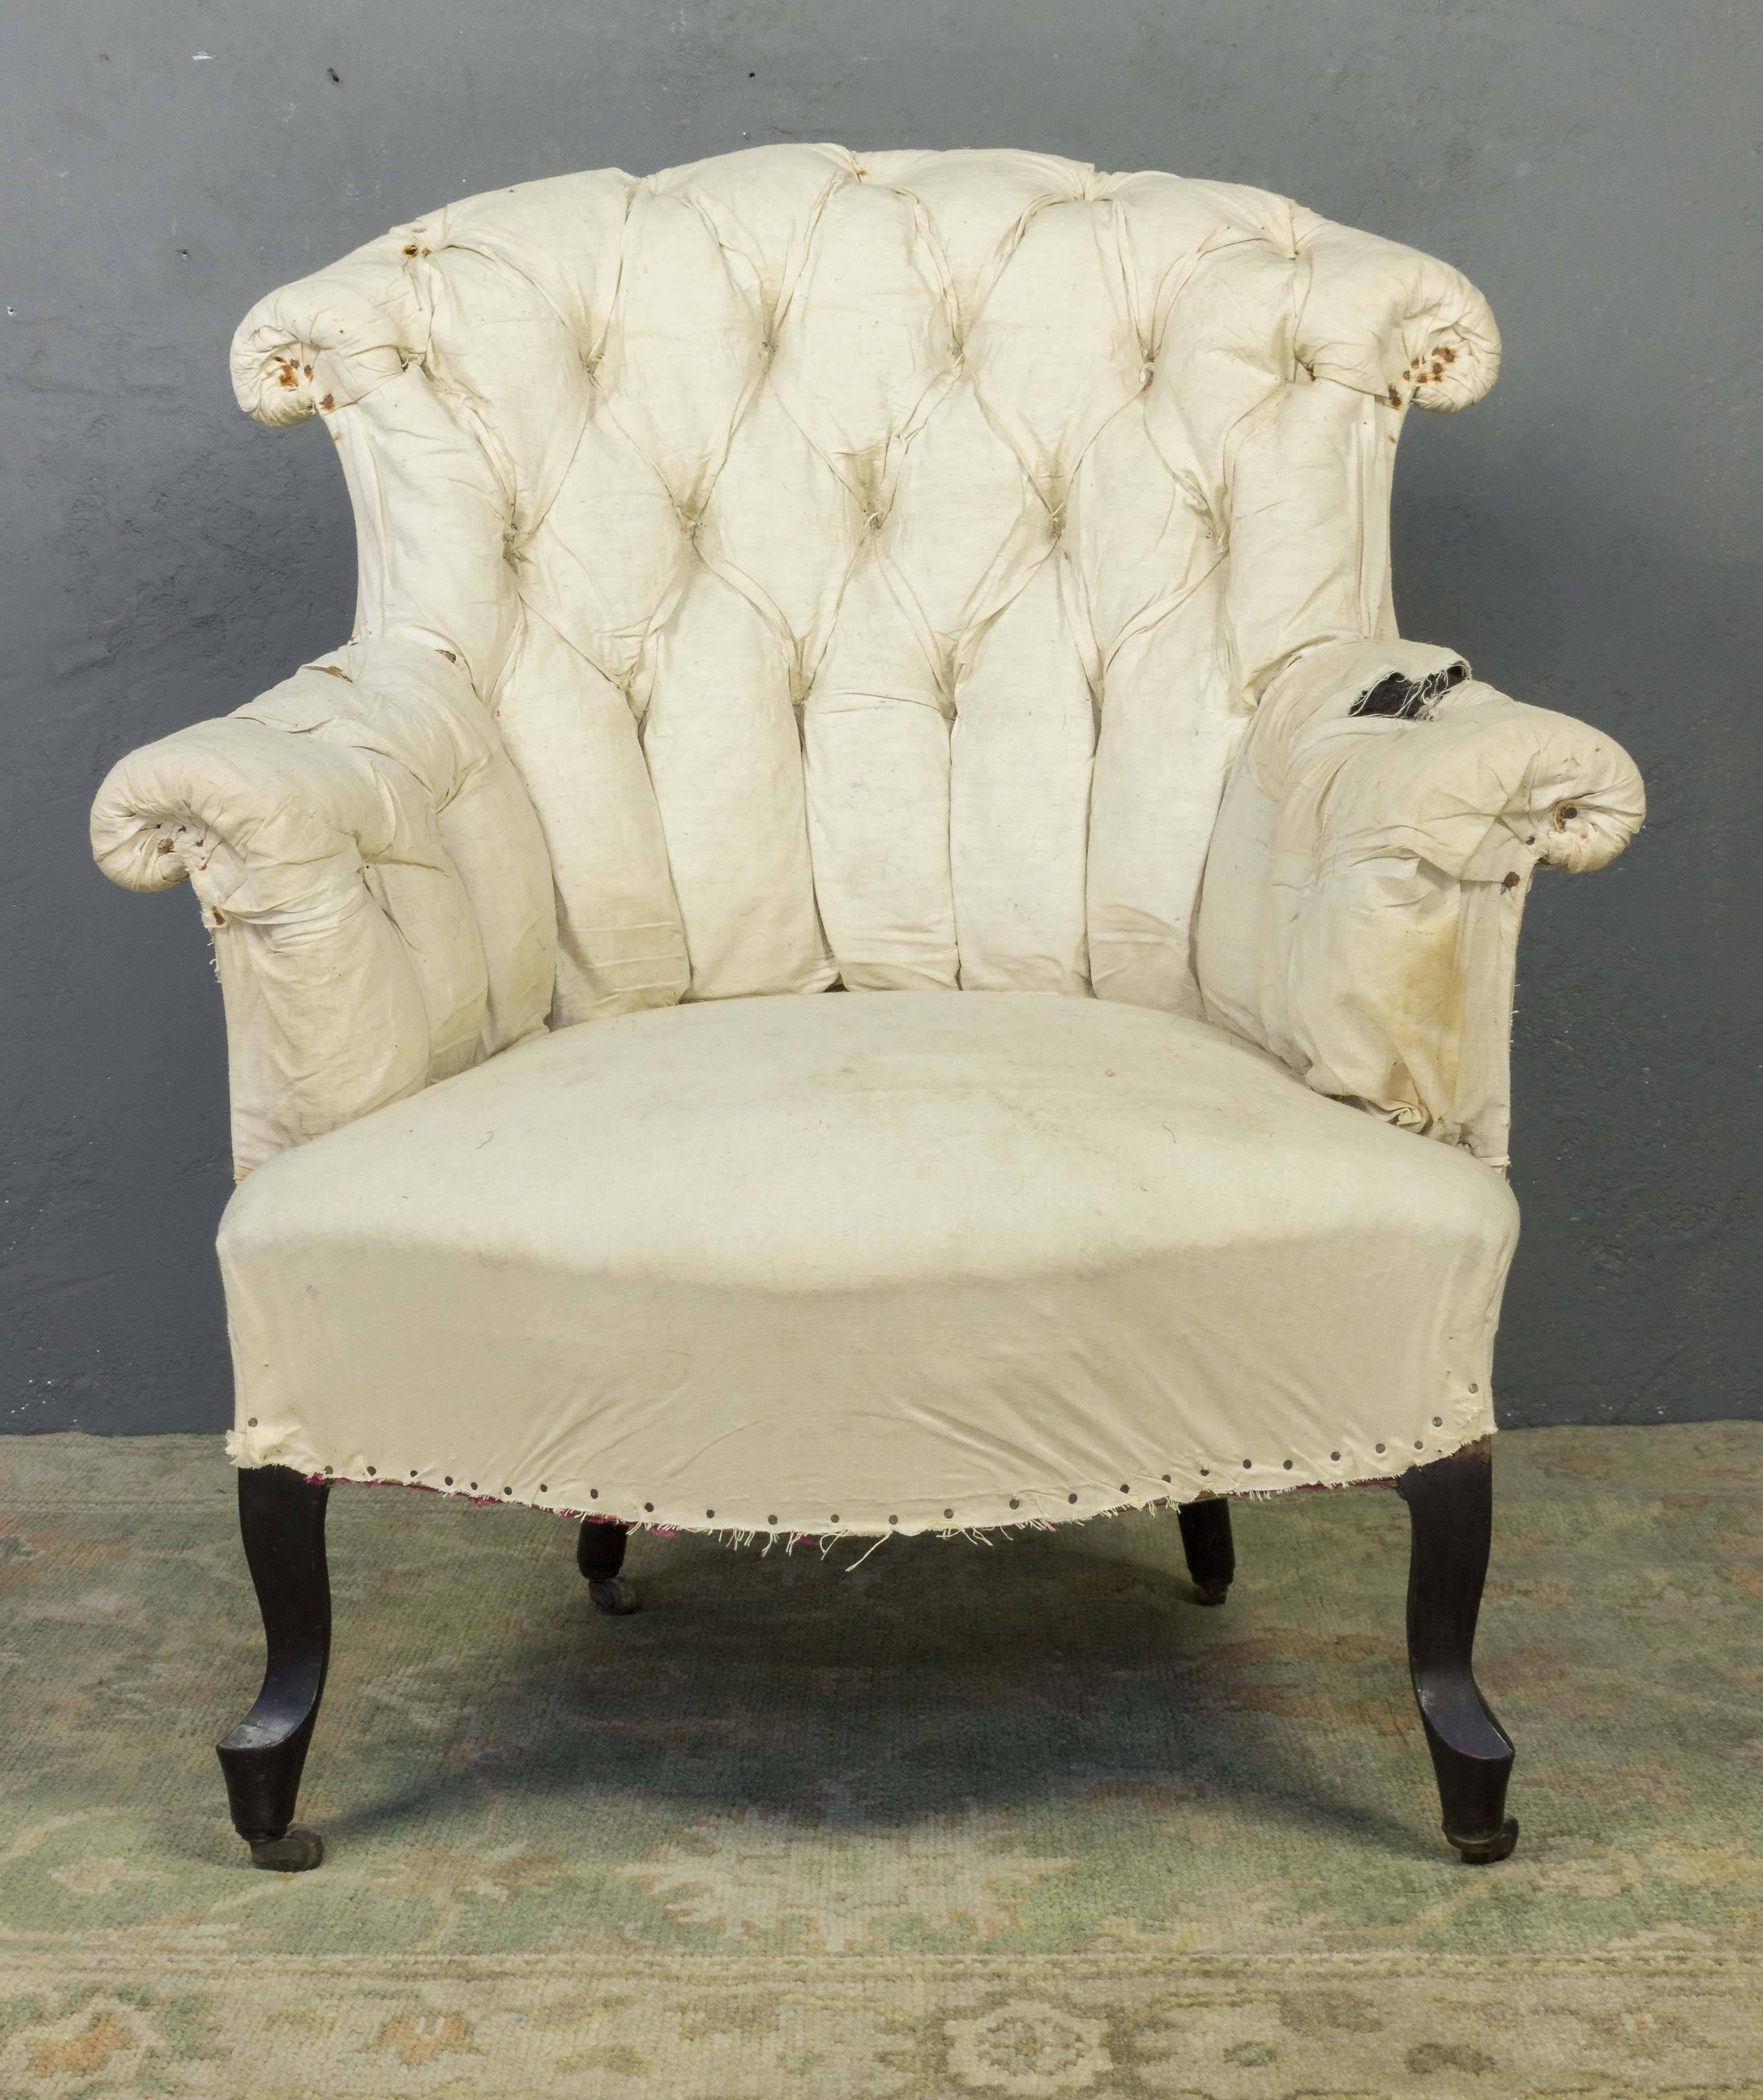 An exquisite pair of French 19th century tufted armchairs with cabriole legs. Capturing the intricate details and romantic beauty of Napoleon III design, these armchairs command attention with their cabriole legs and heavily tufted backs. A graceful